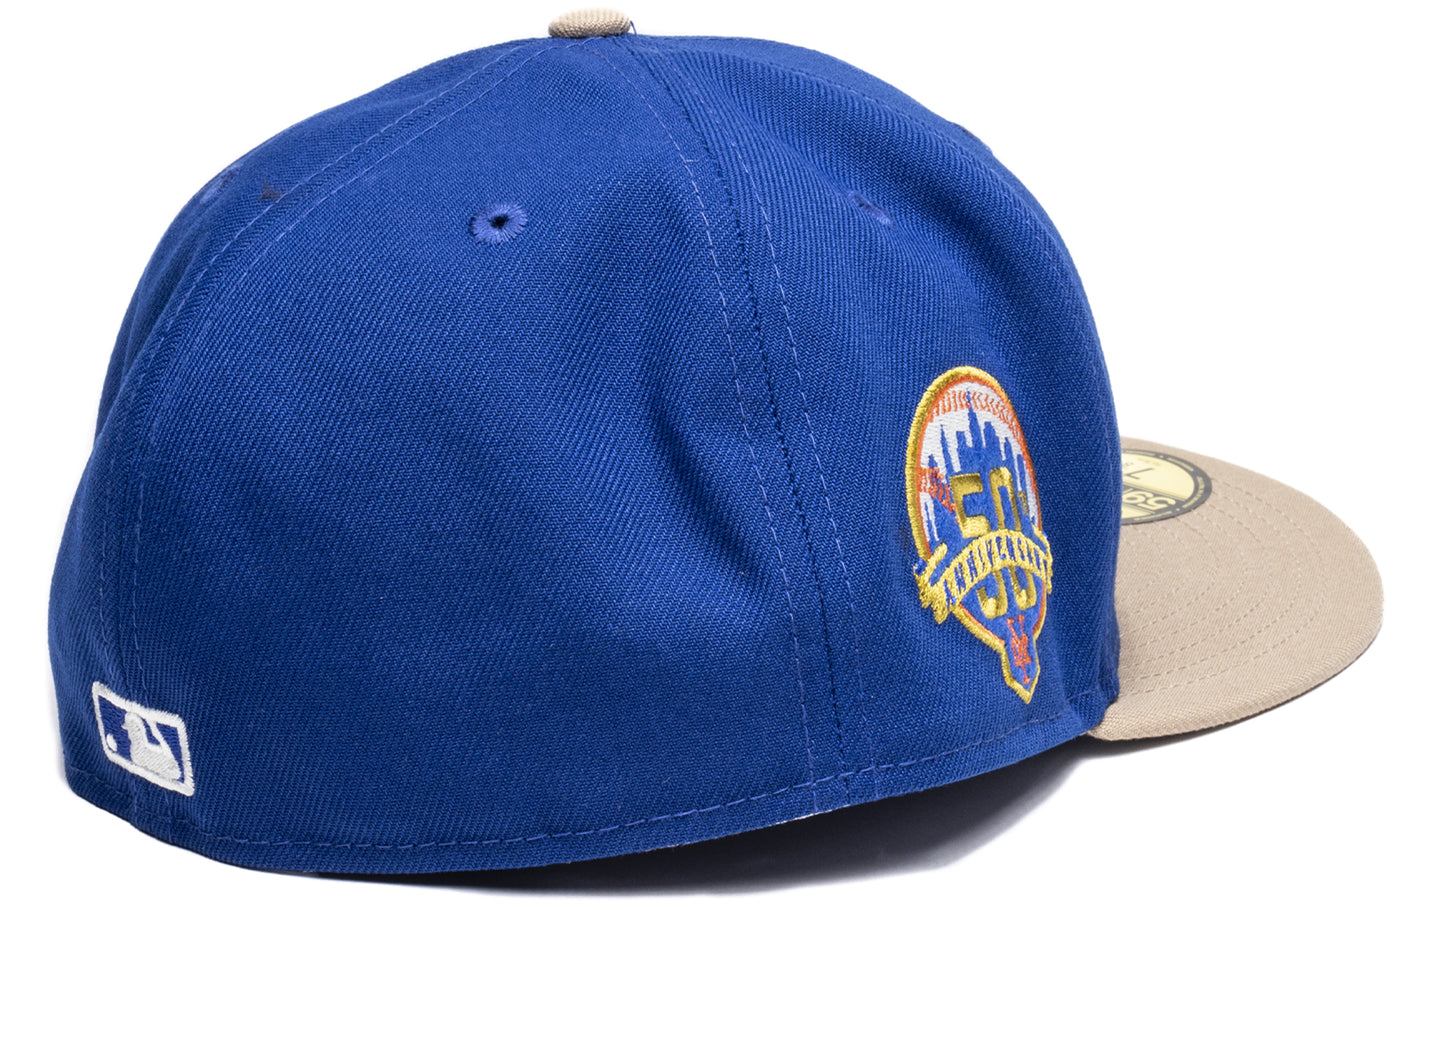 New Era Varsity Pin New York Mets Fitted Hat xld